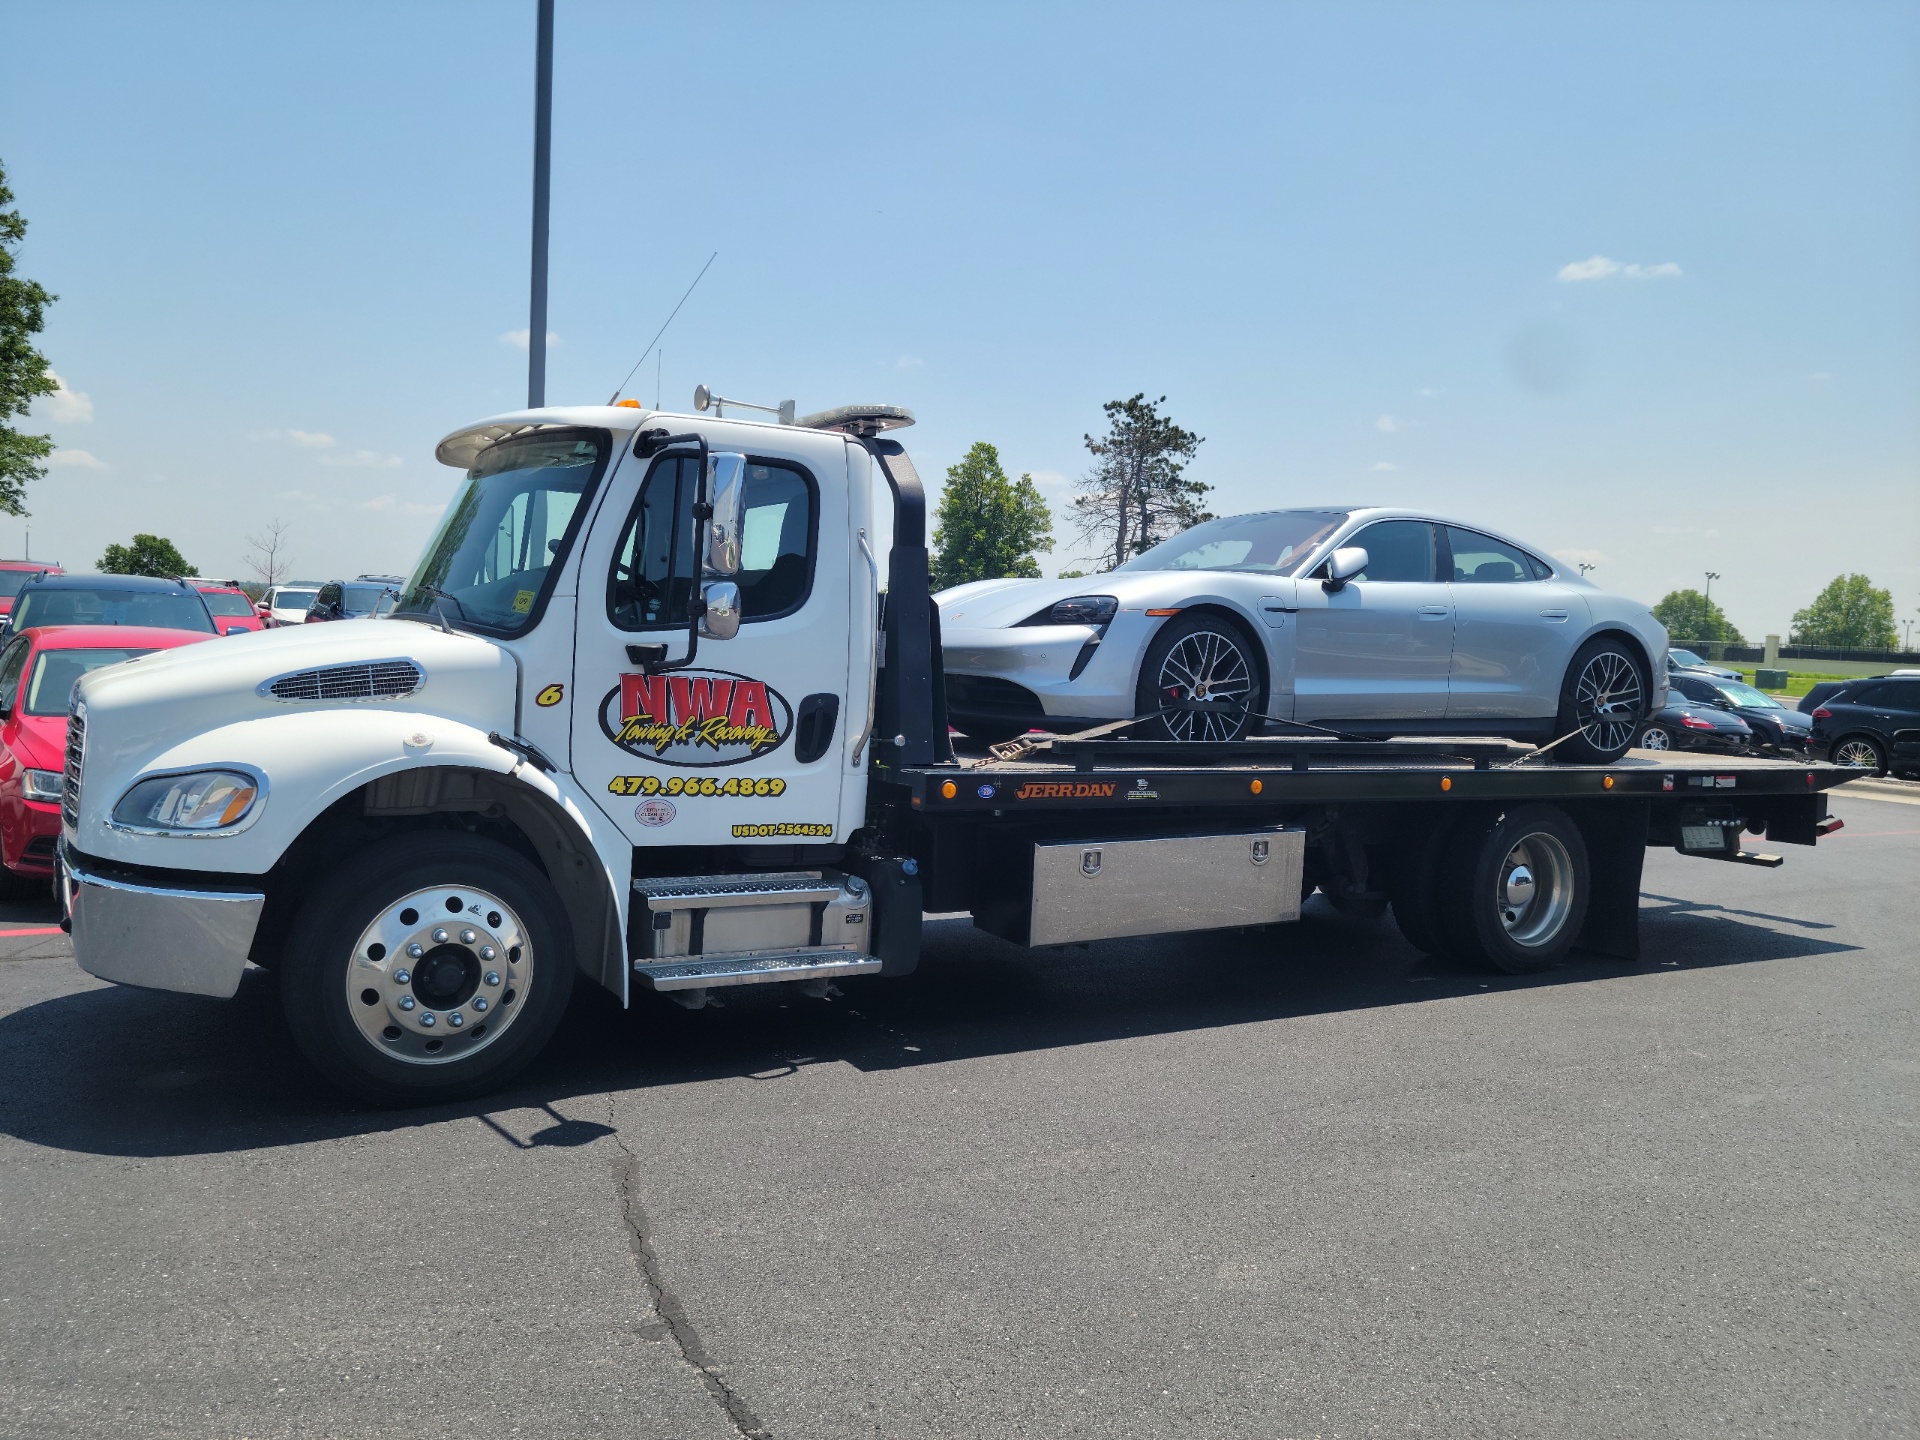 NWA Tow provides top-tier Towing & Recovery services in Northwest Arkansas, ensuring prompt, safe, and reliable assistance for all your roadside needs. Available 24/7, trust us to get you back on the road swiftly and securely.